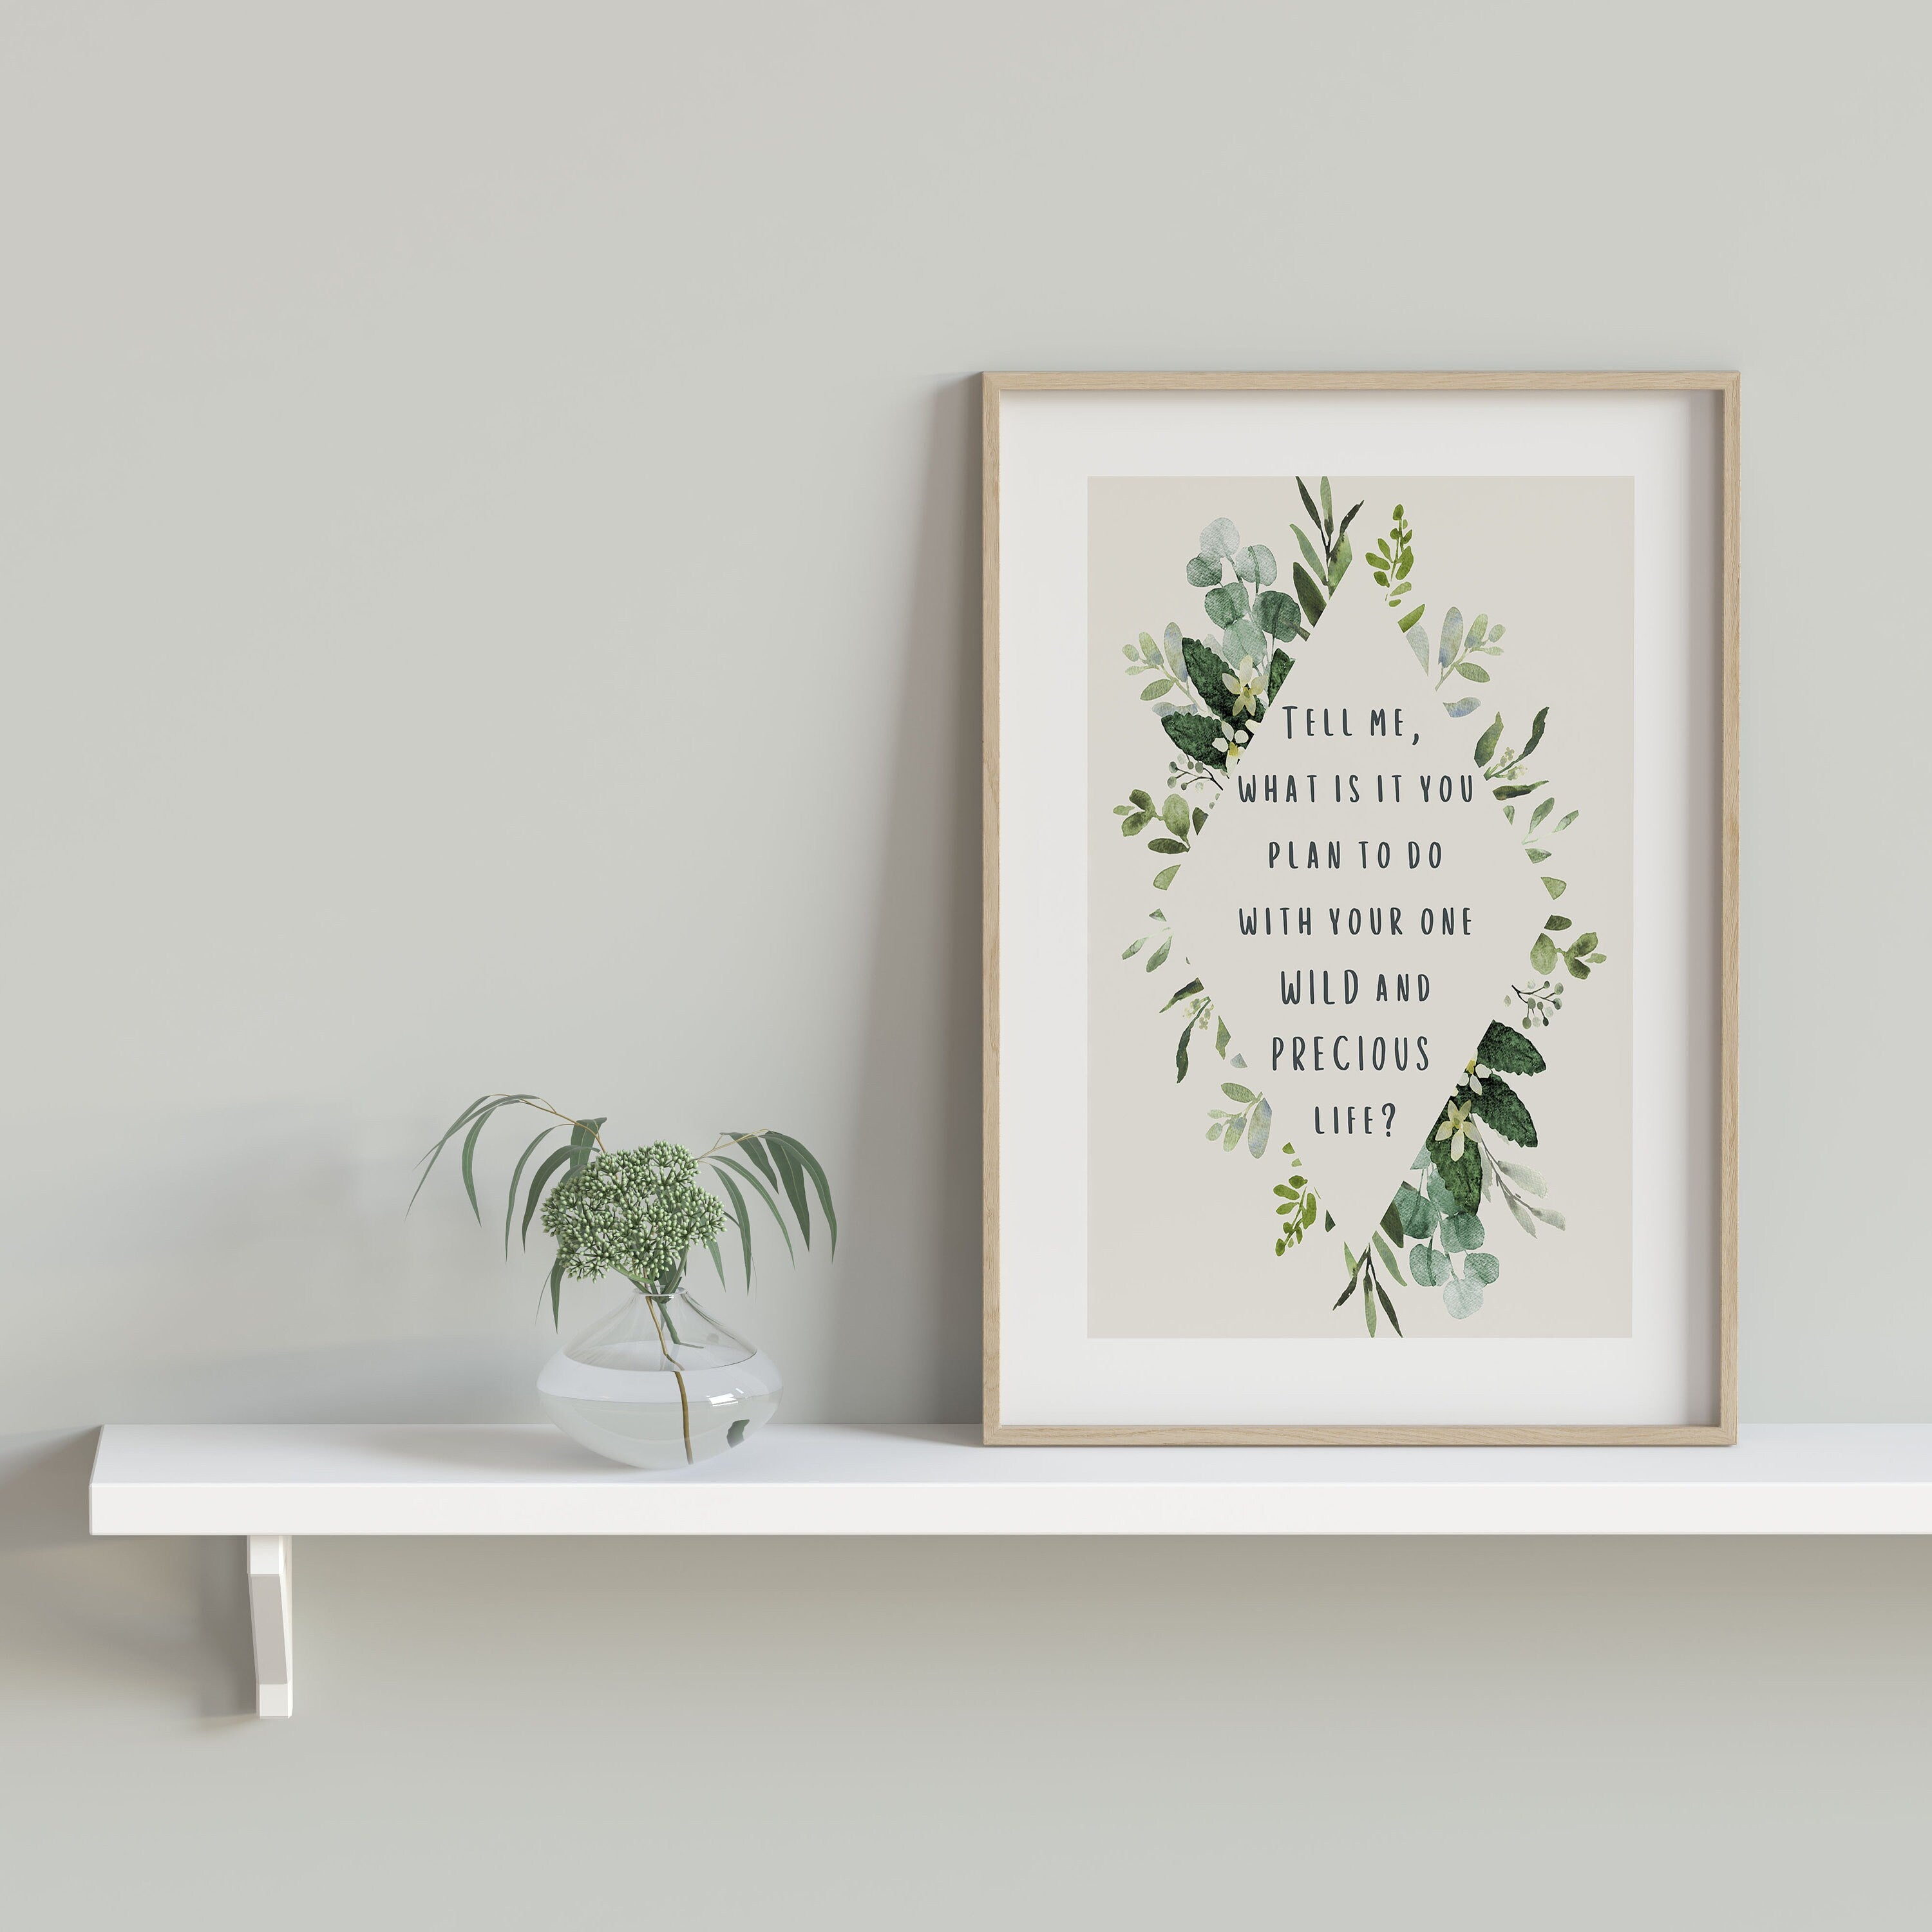 Tell Me What Is It You Plan To Do With Your One Wild and Precious Life? Living Room, Office or Bedroom Wall Decor